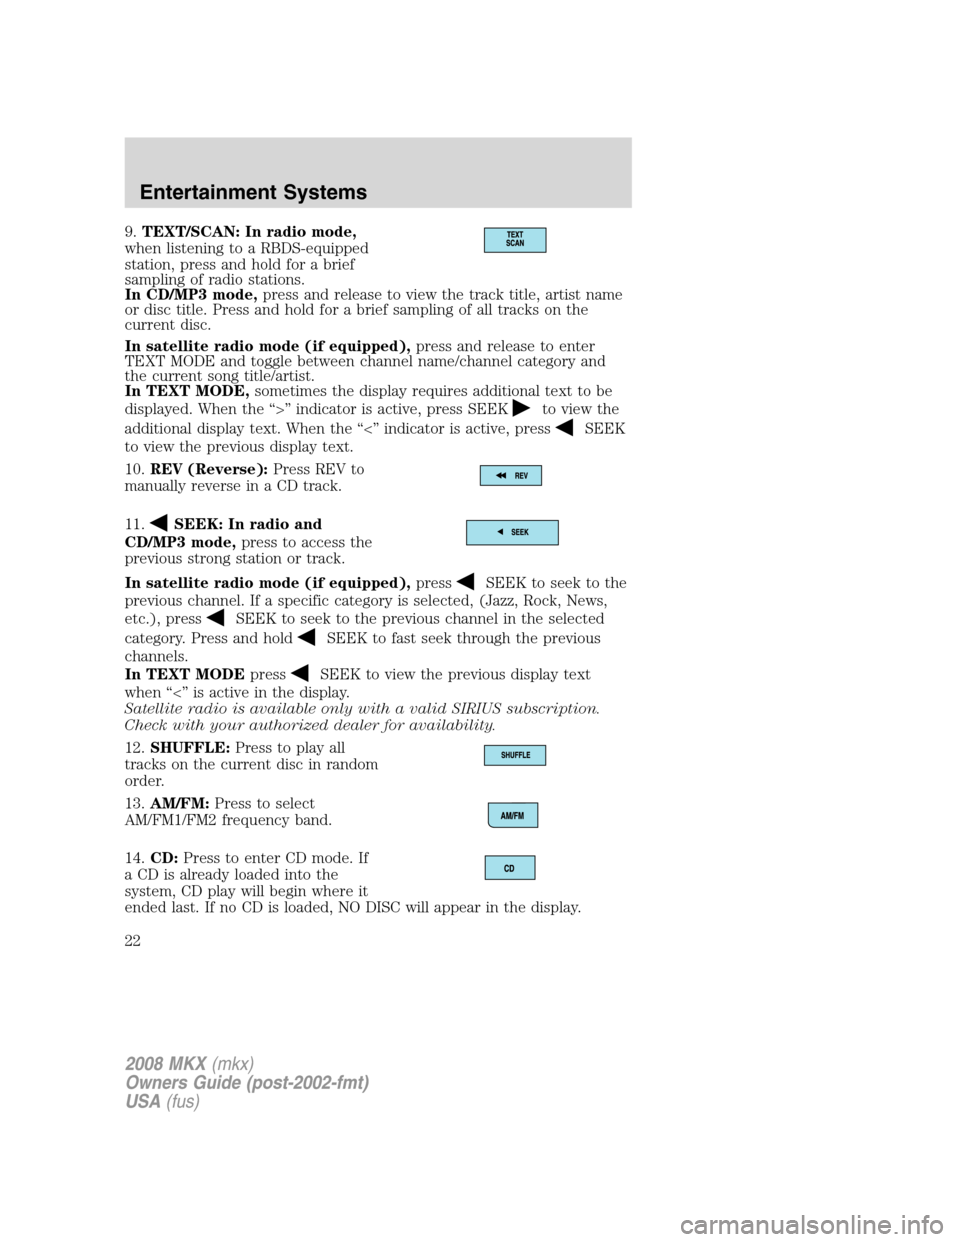 LINCOLN MKX 2008  Owners Manual 9.TEXT/SCAN: In radio mode,
when listening to a RBDS-equipped
station, press and hold for a brief
sampling of radio stations.
In CD/MP3 mode,press and release to view the track title, artist name
or d